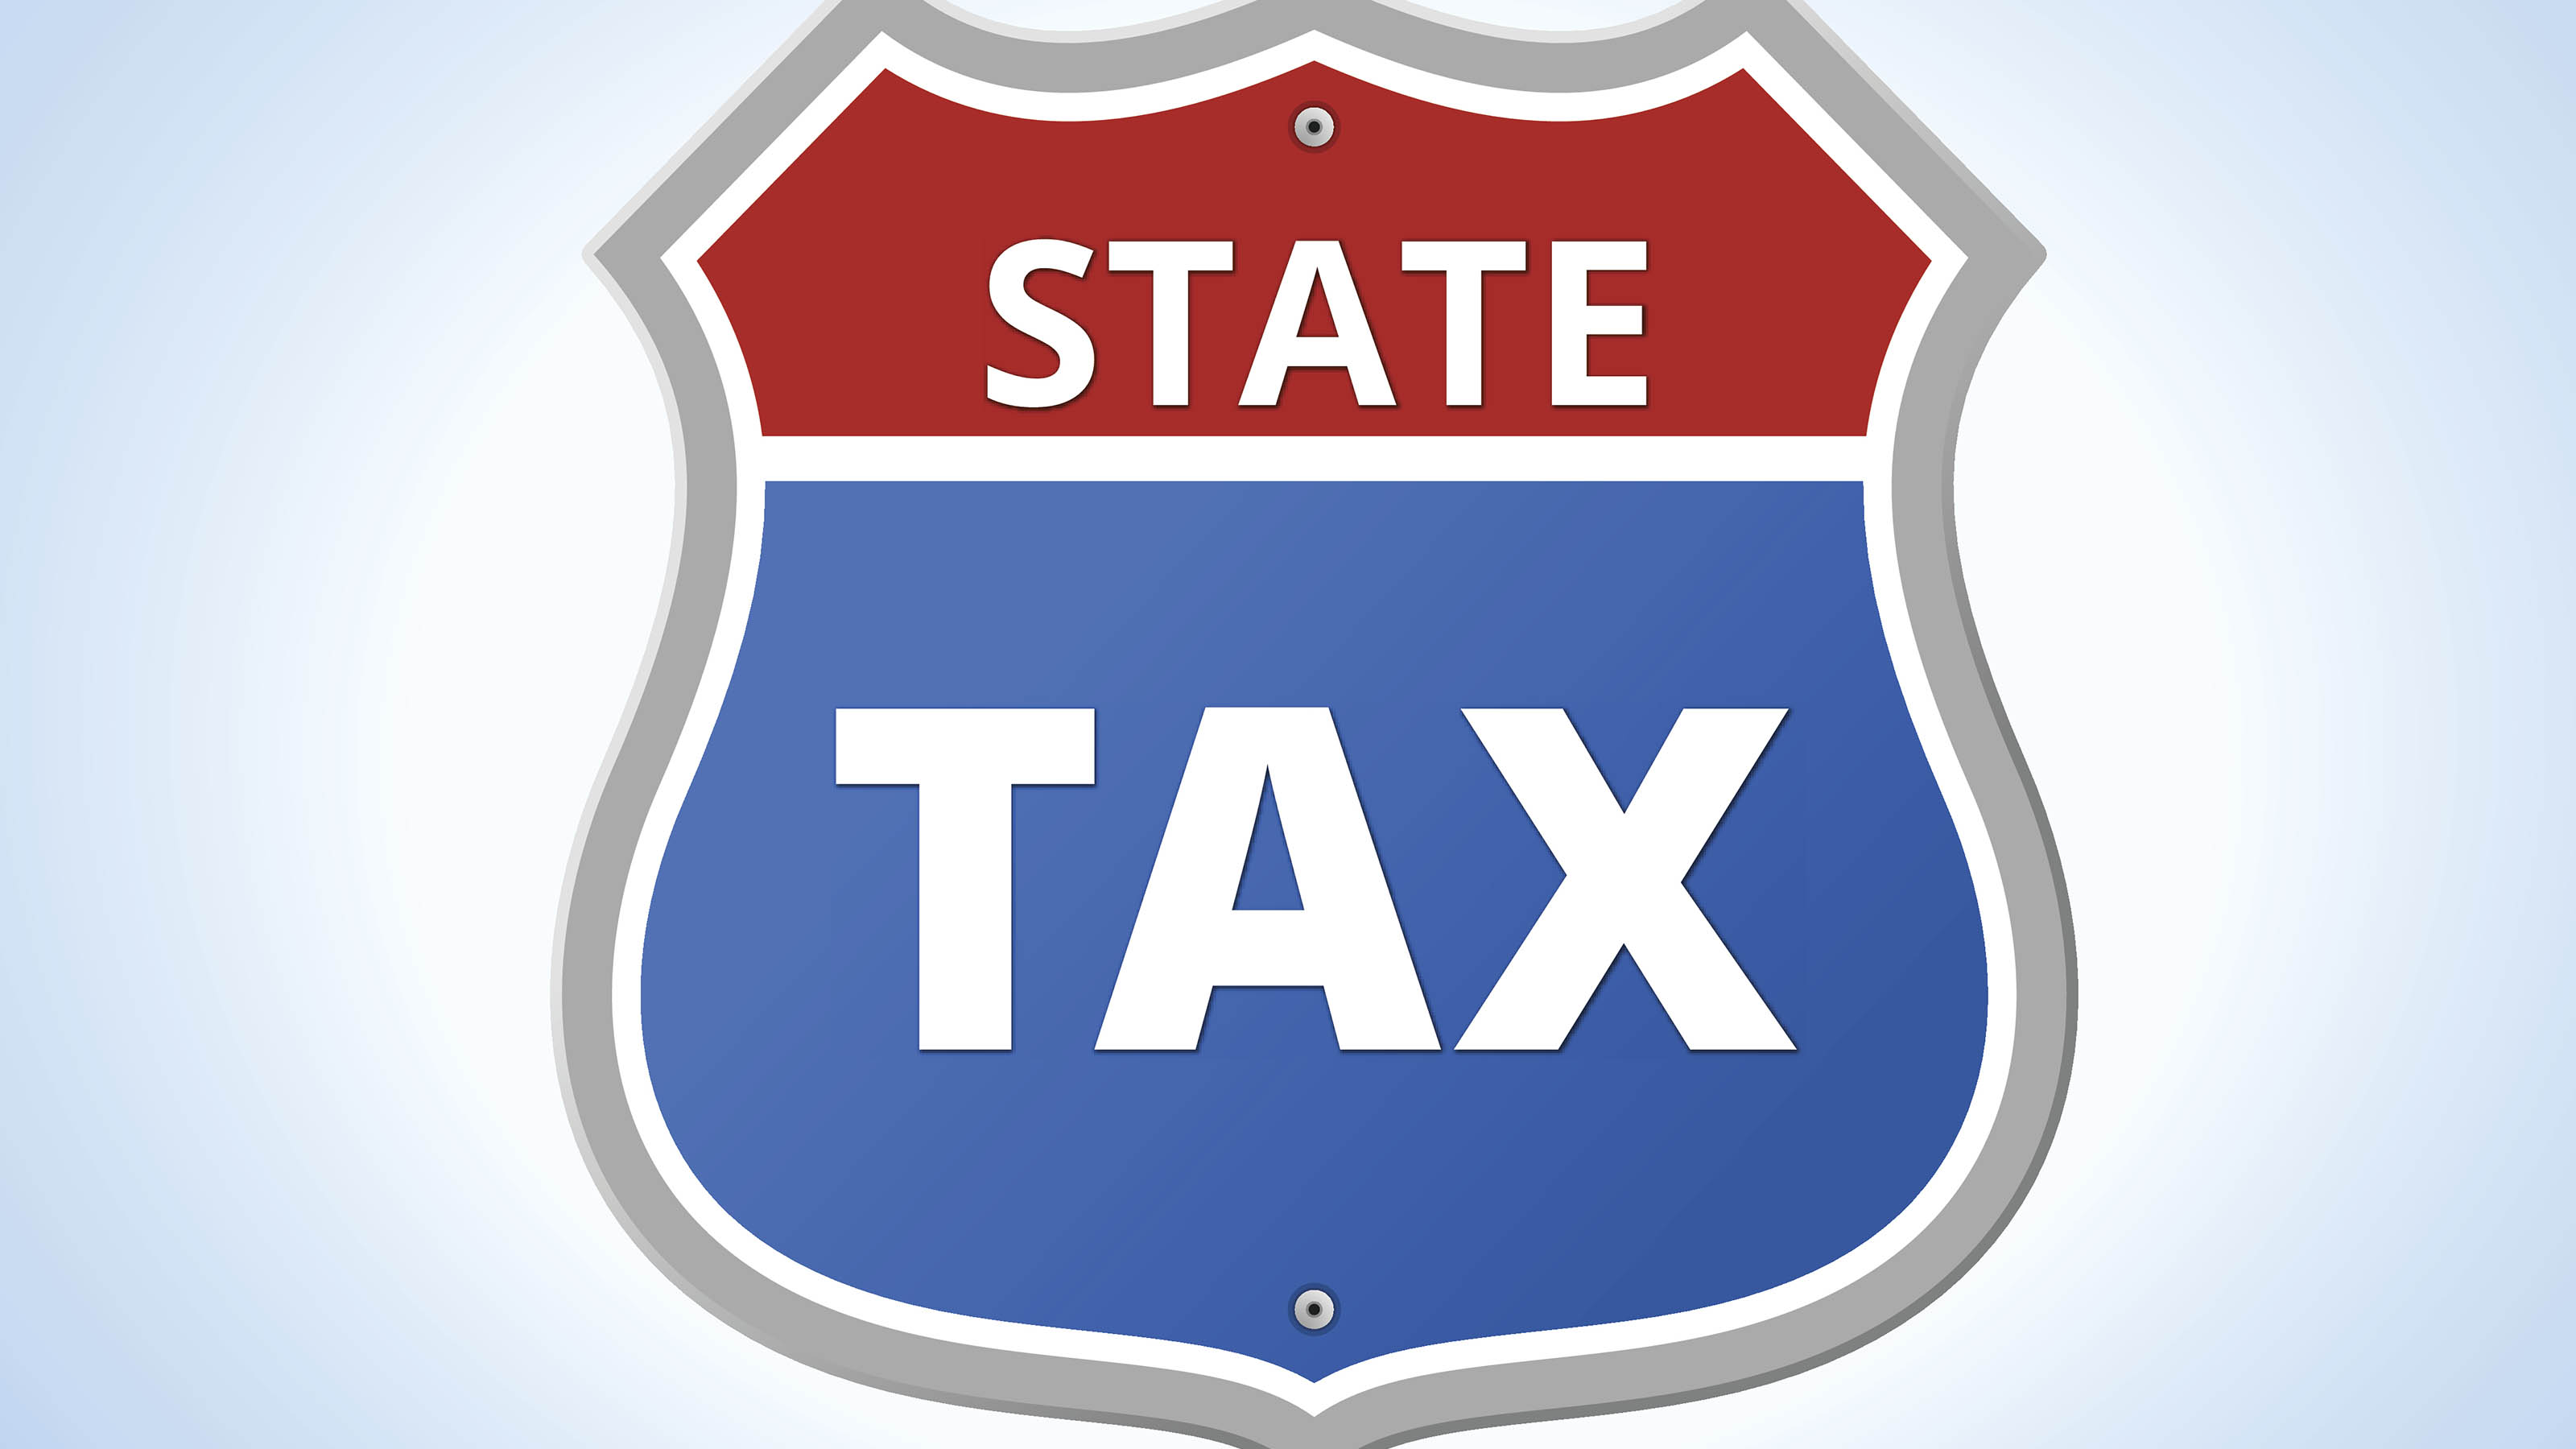 living-and-working-in-different-states-can-be-a-tax-headache-kiplinger